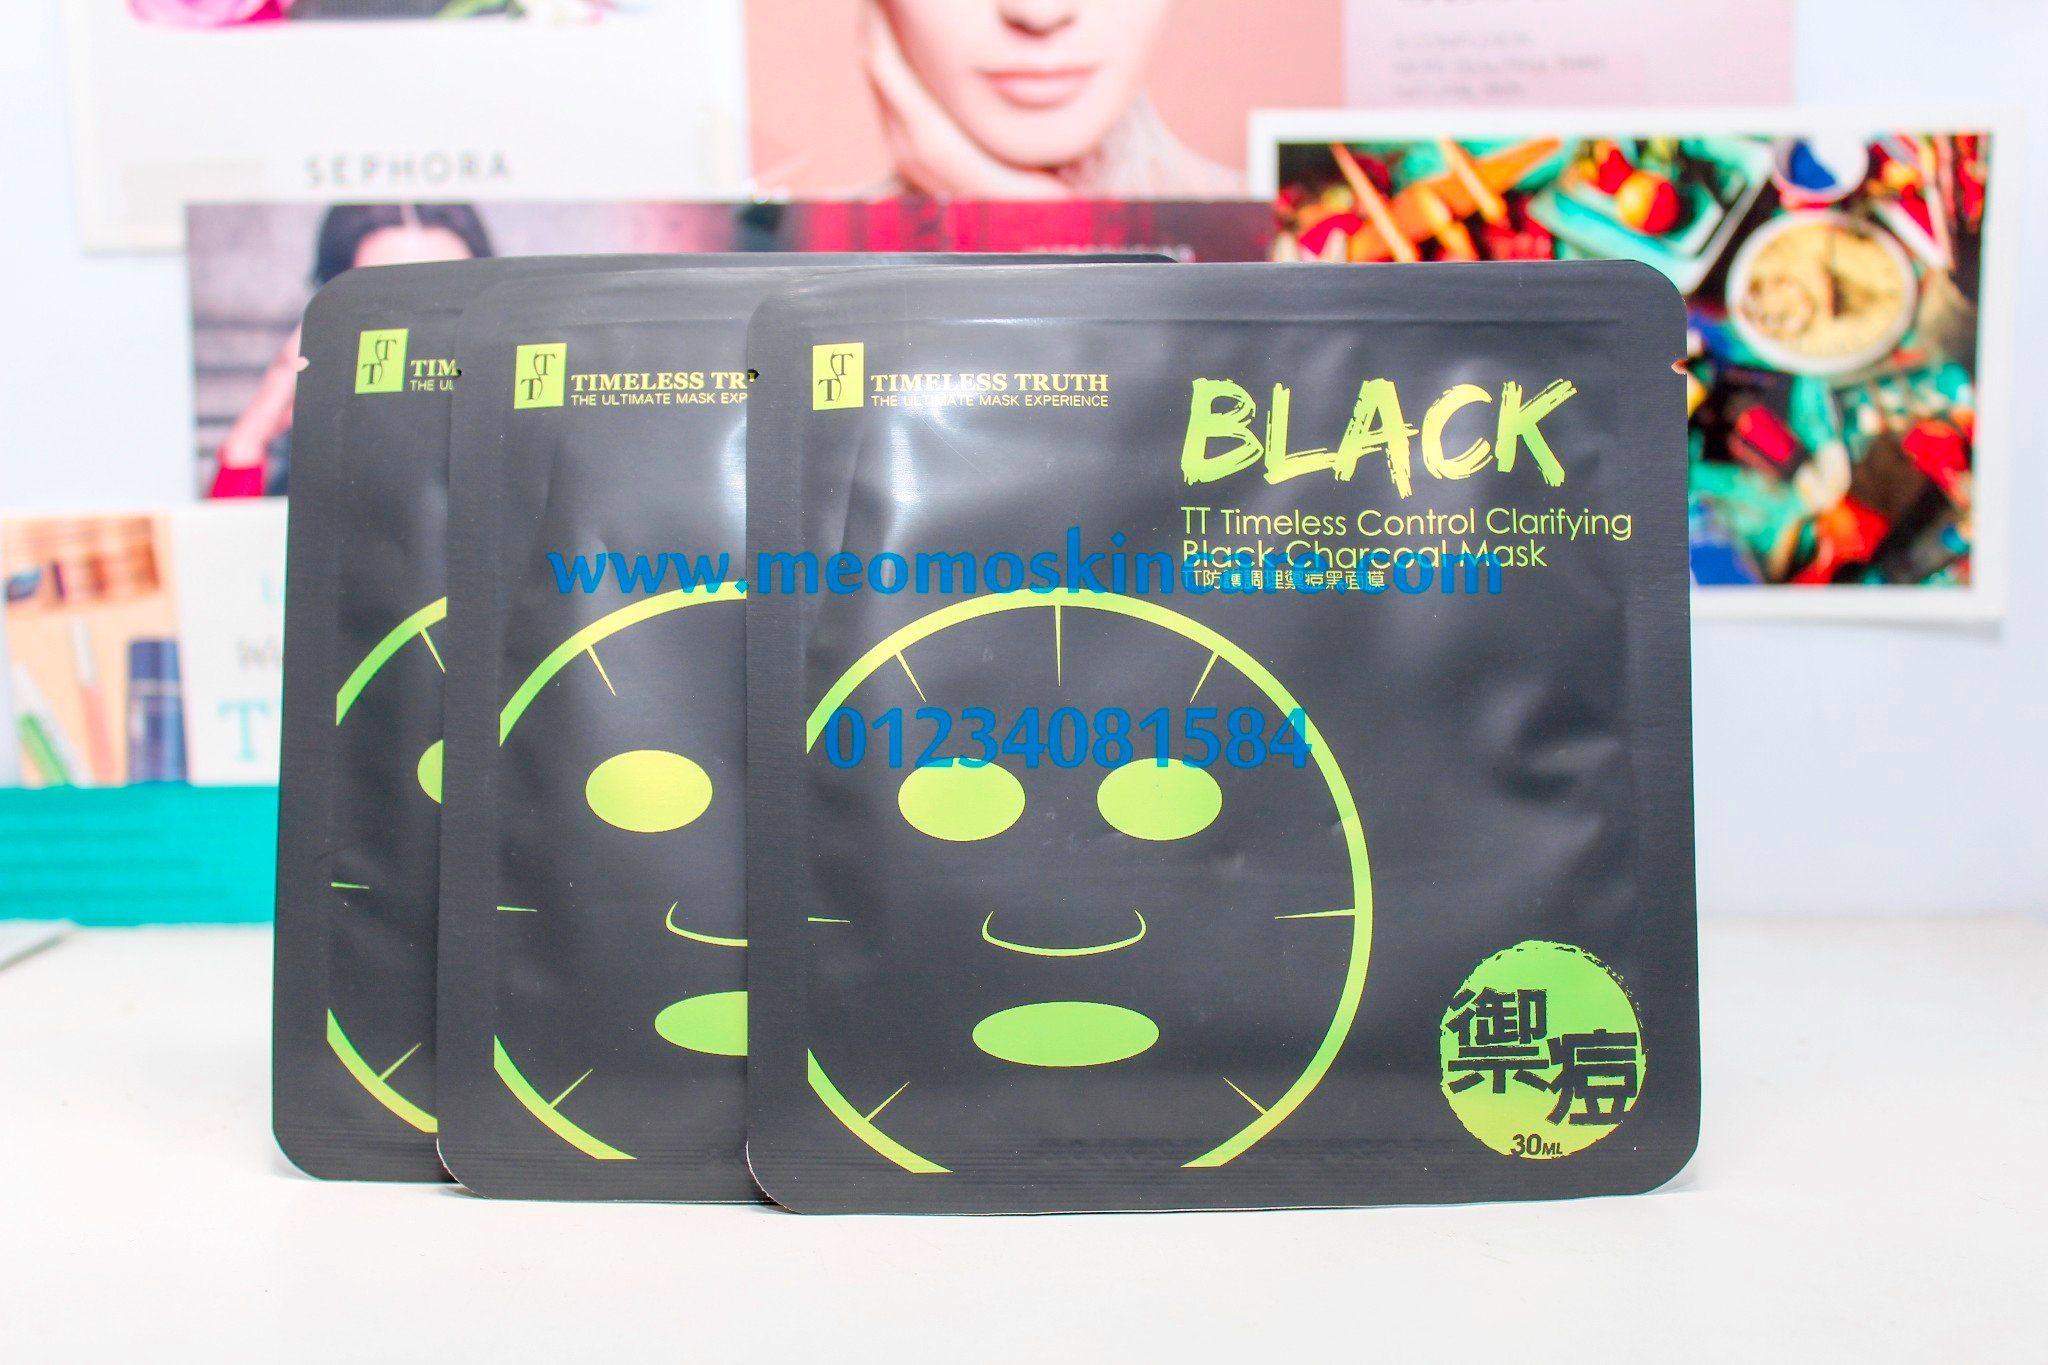 Timeless Truth Black CONTROL CLARIFYING Black Charcoal Mask